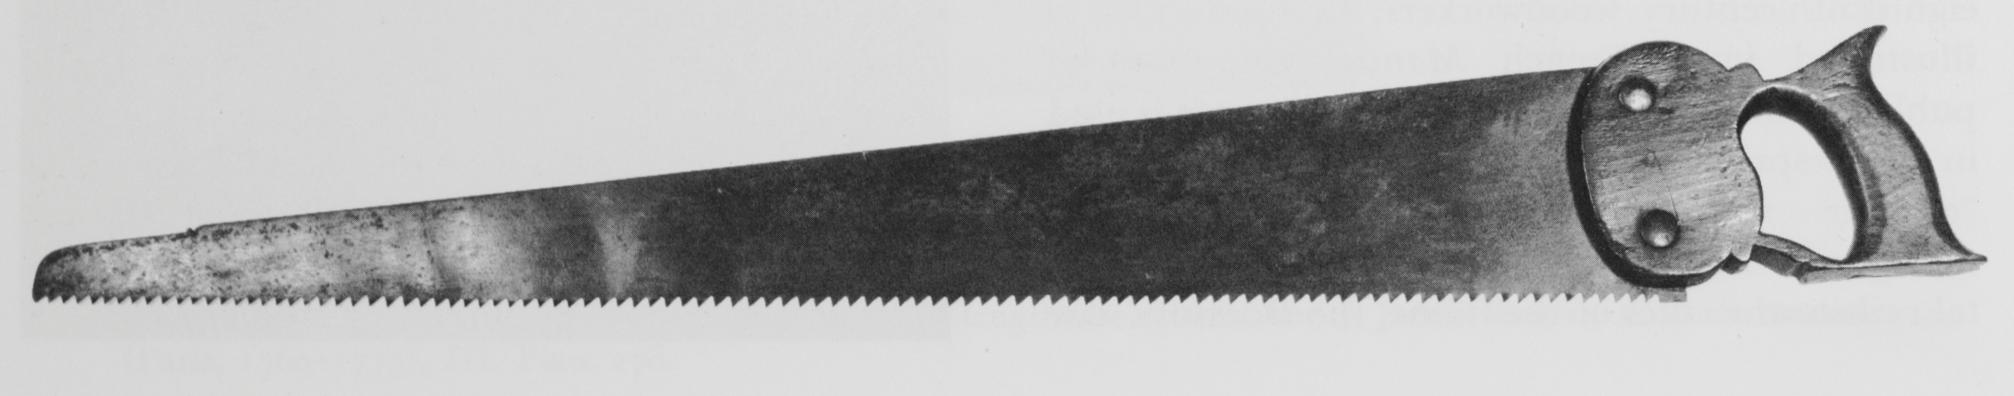 Black and white photograph of a handsaw.